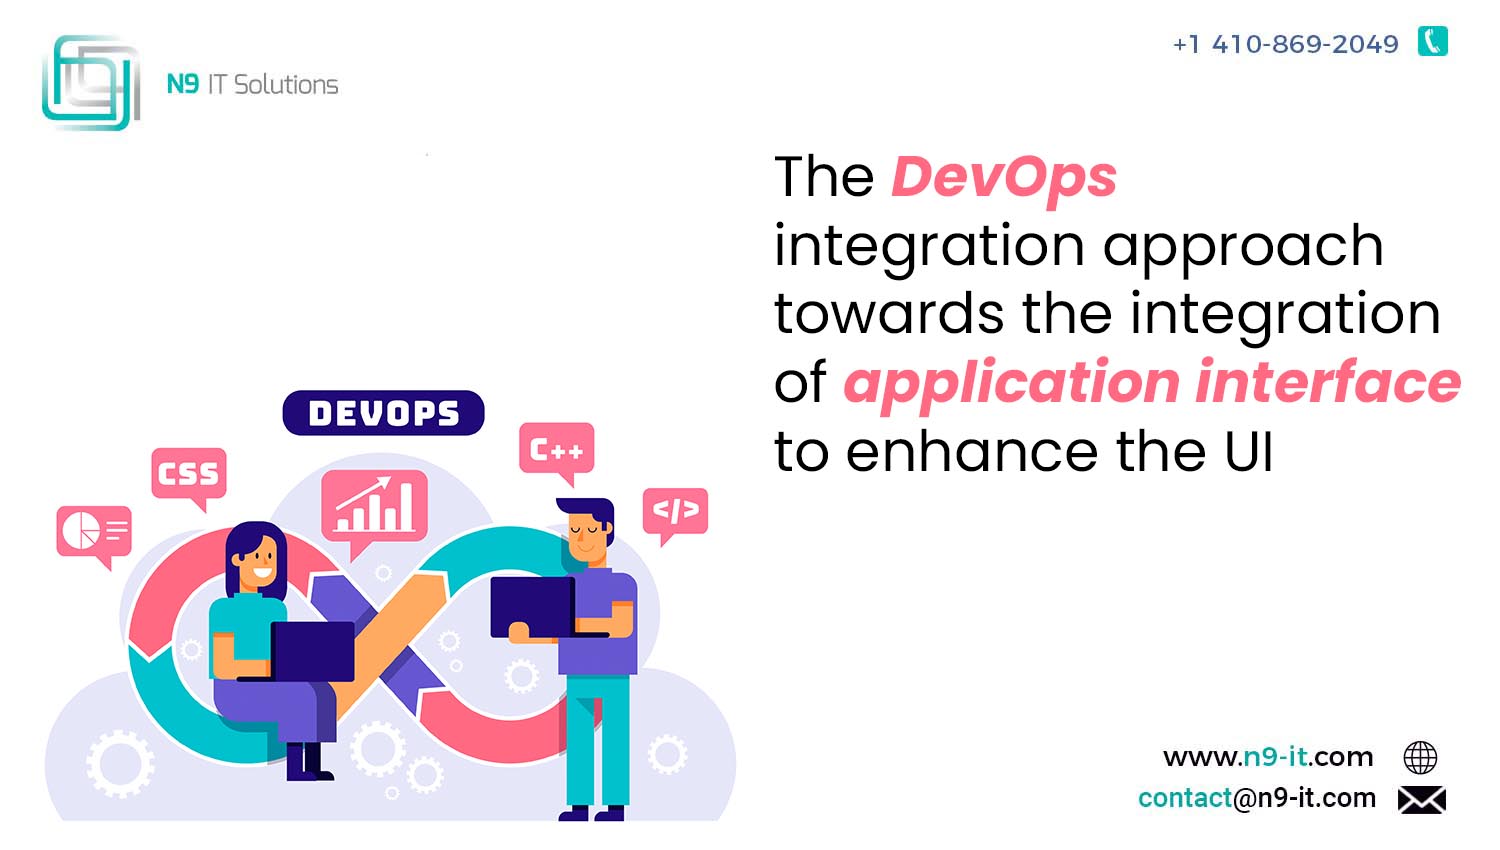 The DevOps integration approach towards the integration of application interface to enhance the UI